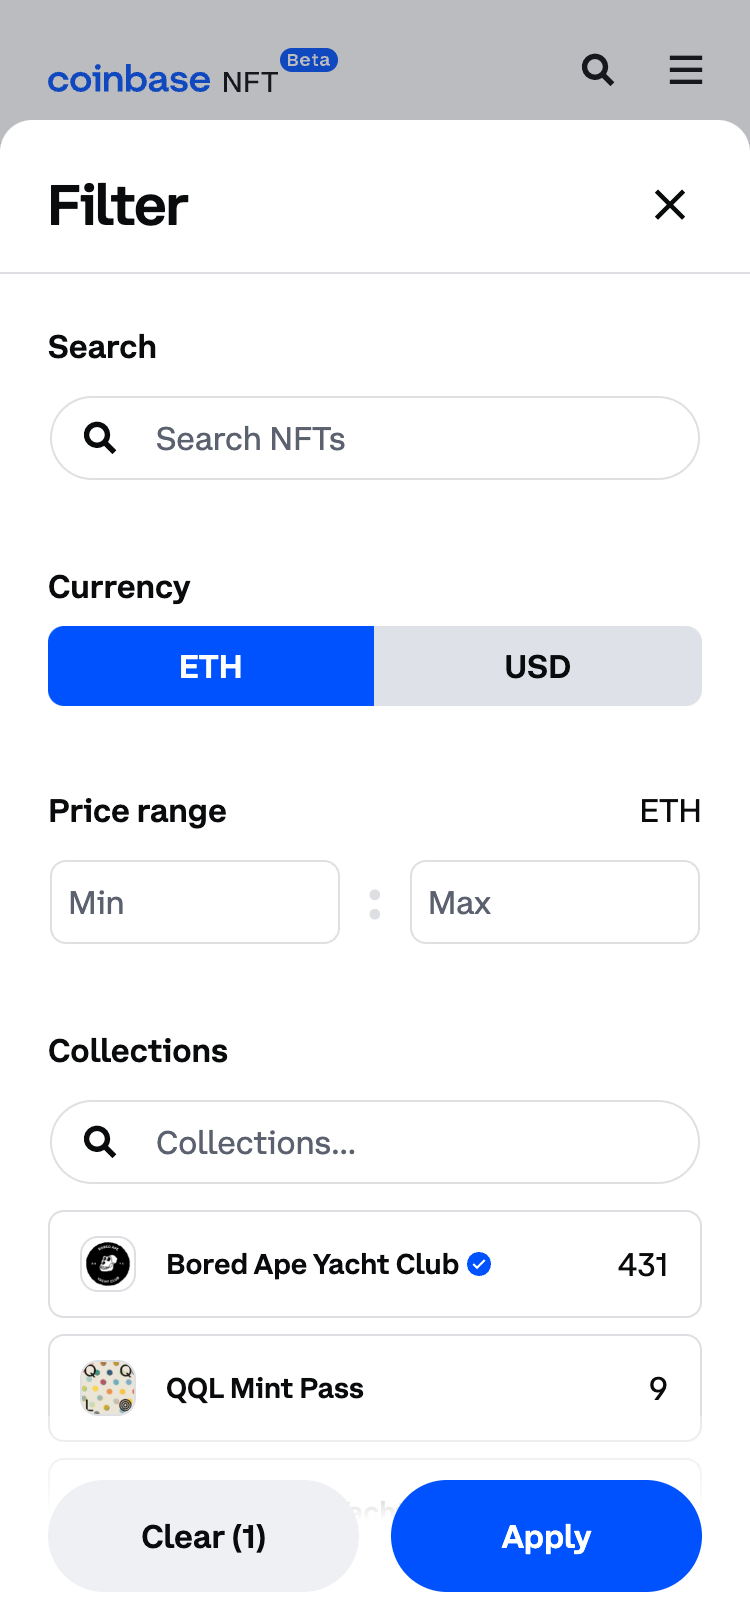 Mobile screenshot of the Coinbase NFT shop filter overlay. The overlay covers most of the screen and contains filters such as 'Search' and 'Price range'. At the bottom of the screen are buttons to 'Clear' or 'Apply' the filters.